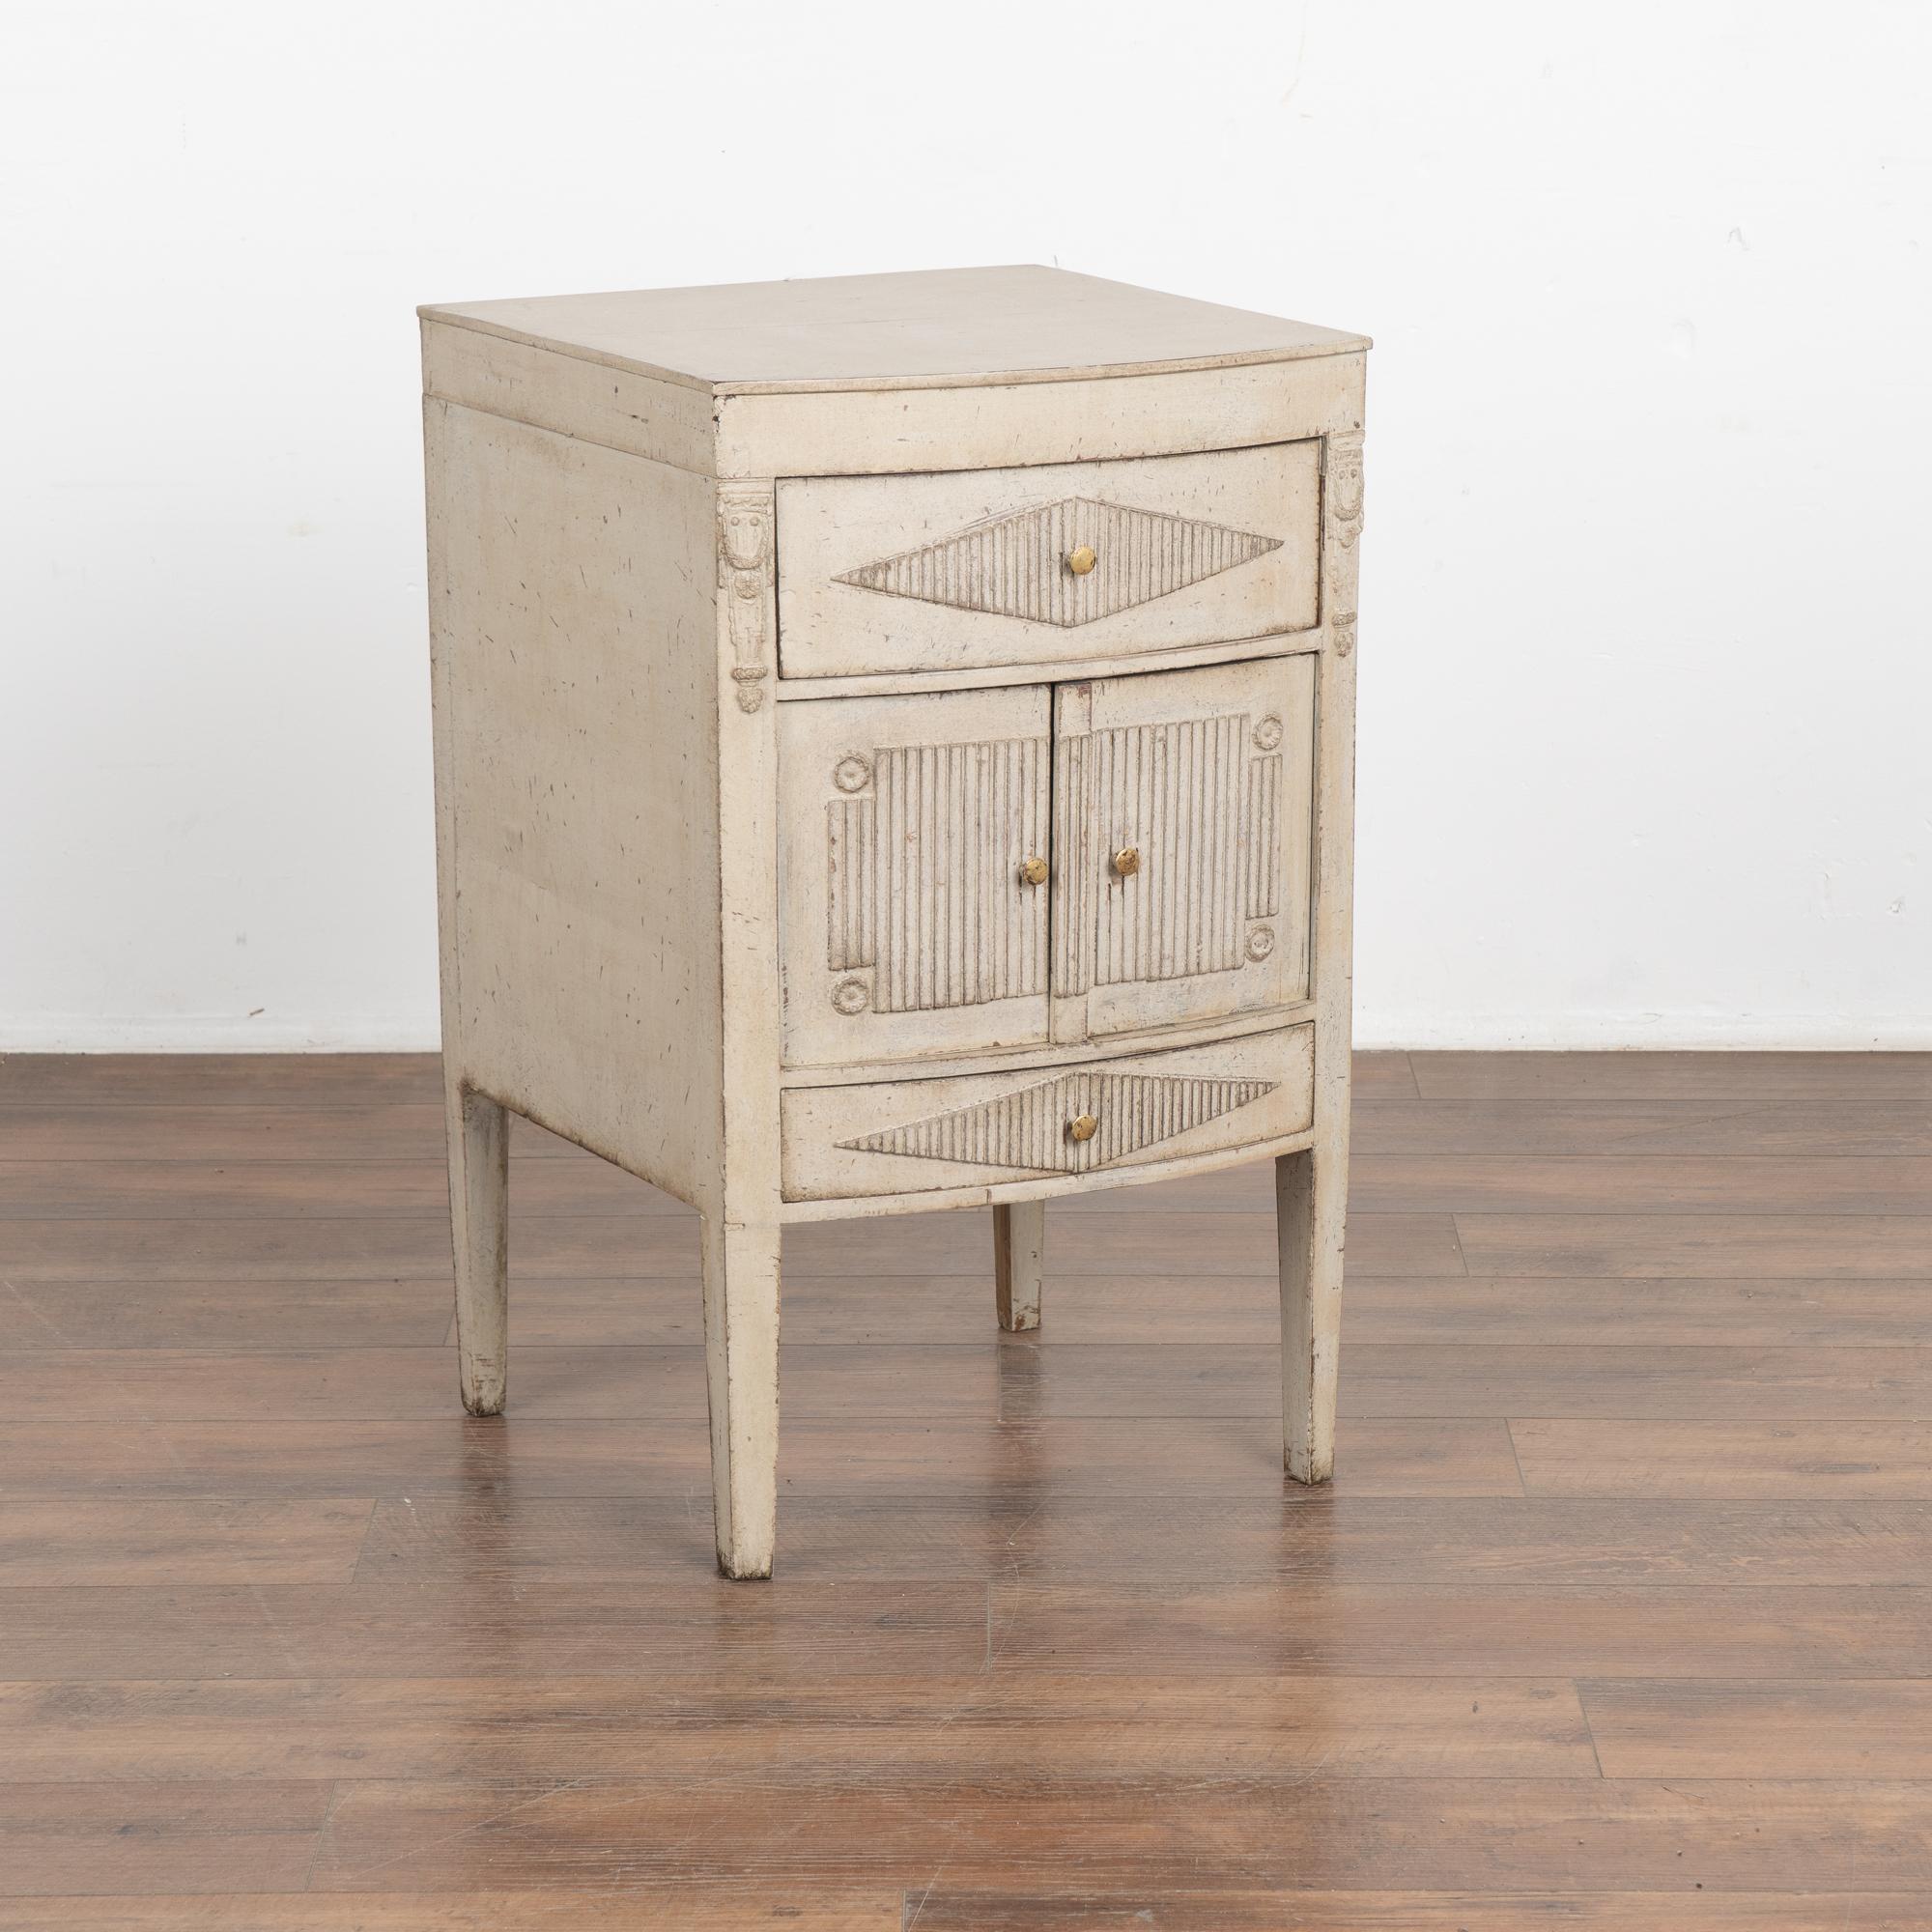 Small Swedish country pine cabinet standing on tapered legs; may serve also as a nightstand or side table.
Small drawers with traditional fluted diamond accent sits above and below the two small cabinet doors, each with a simple brass pull knob.
The